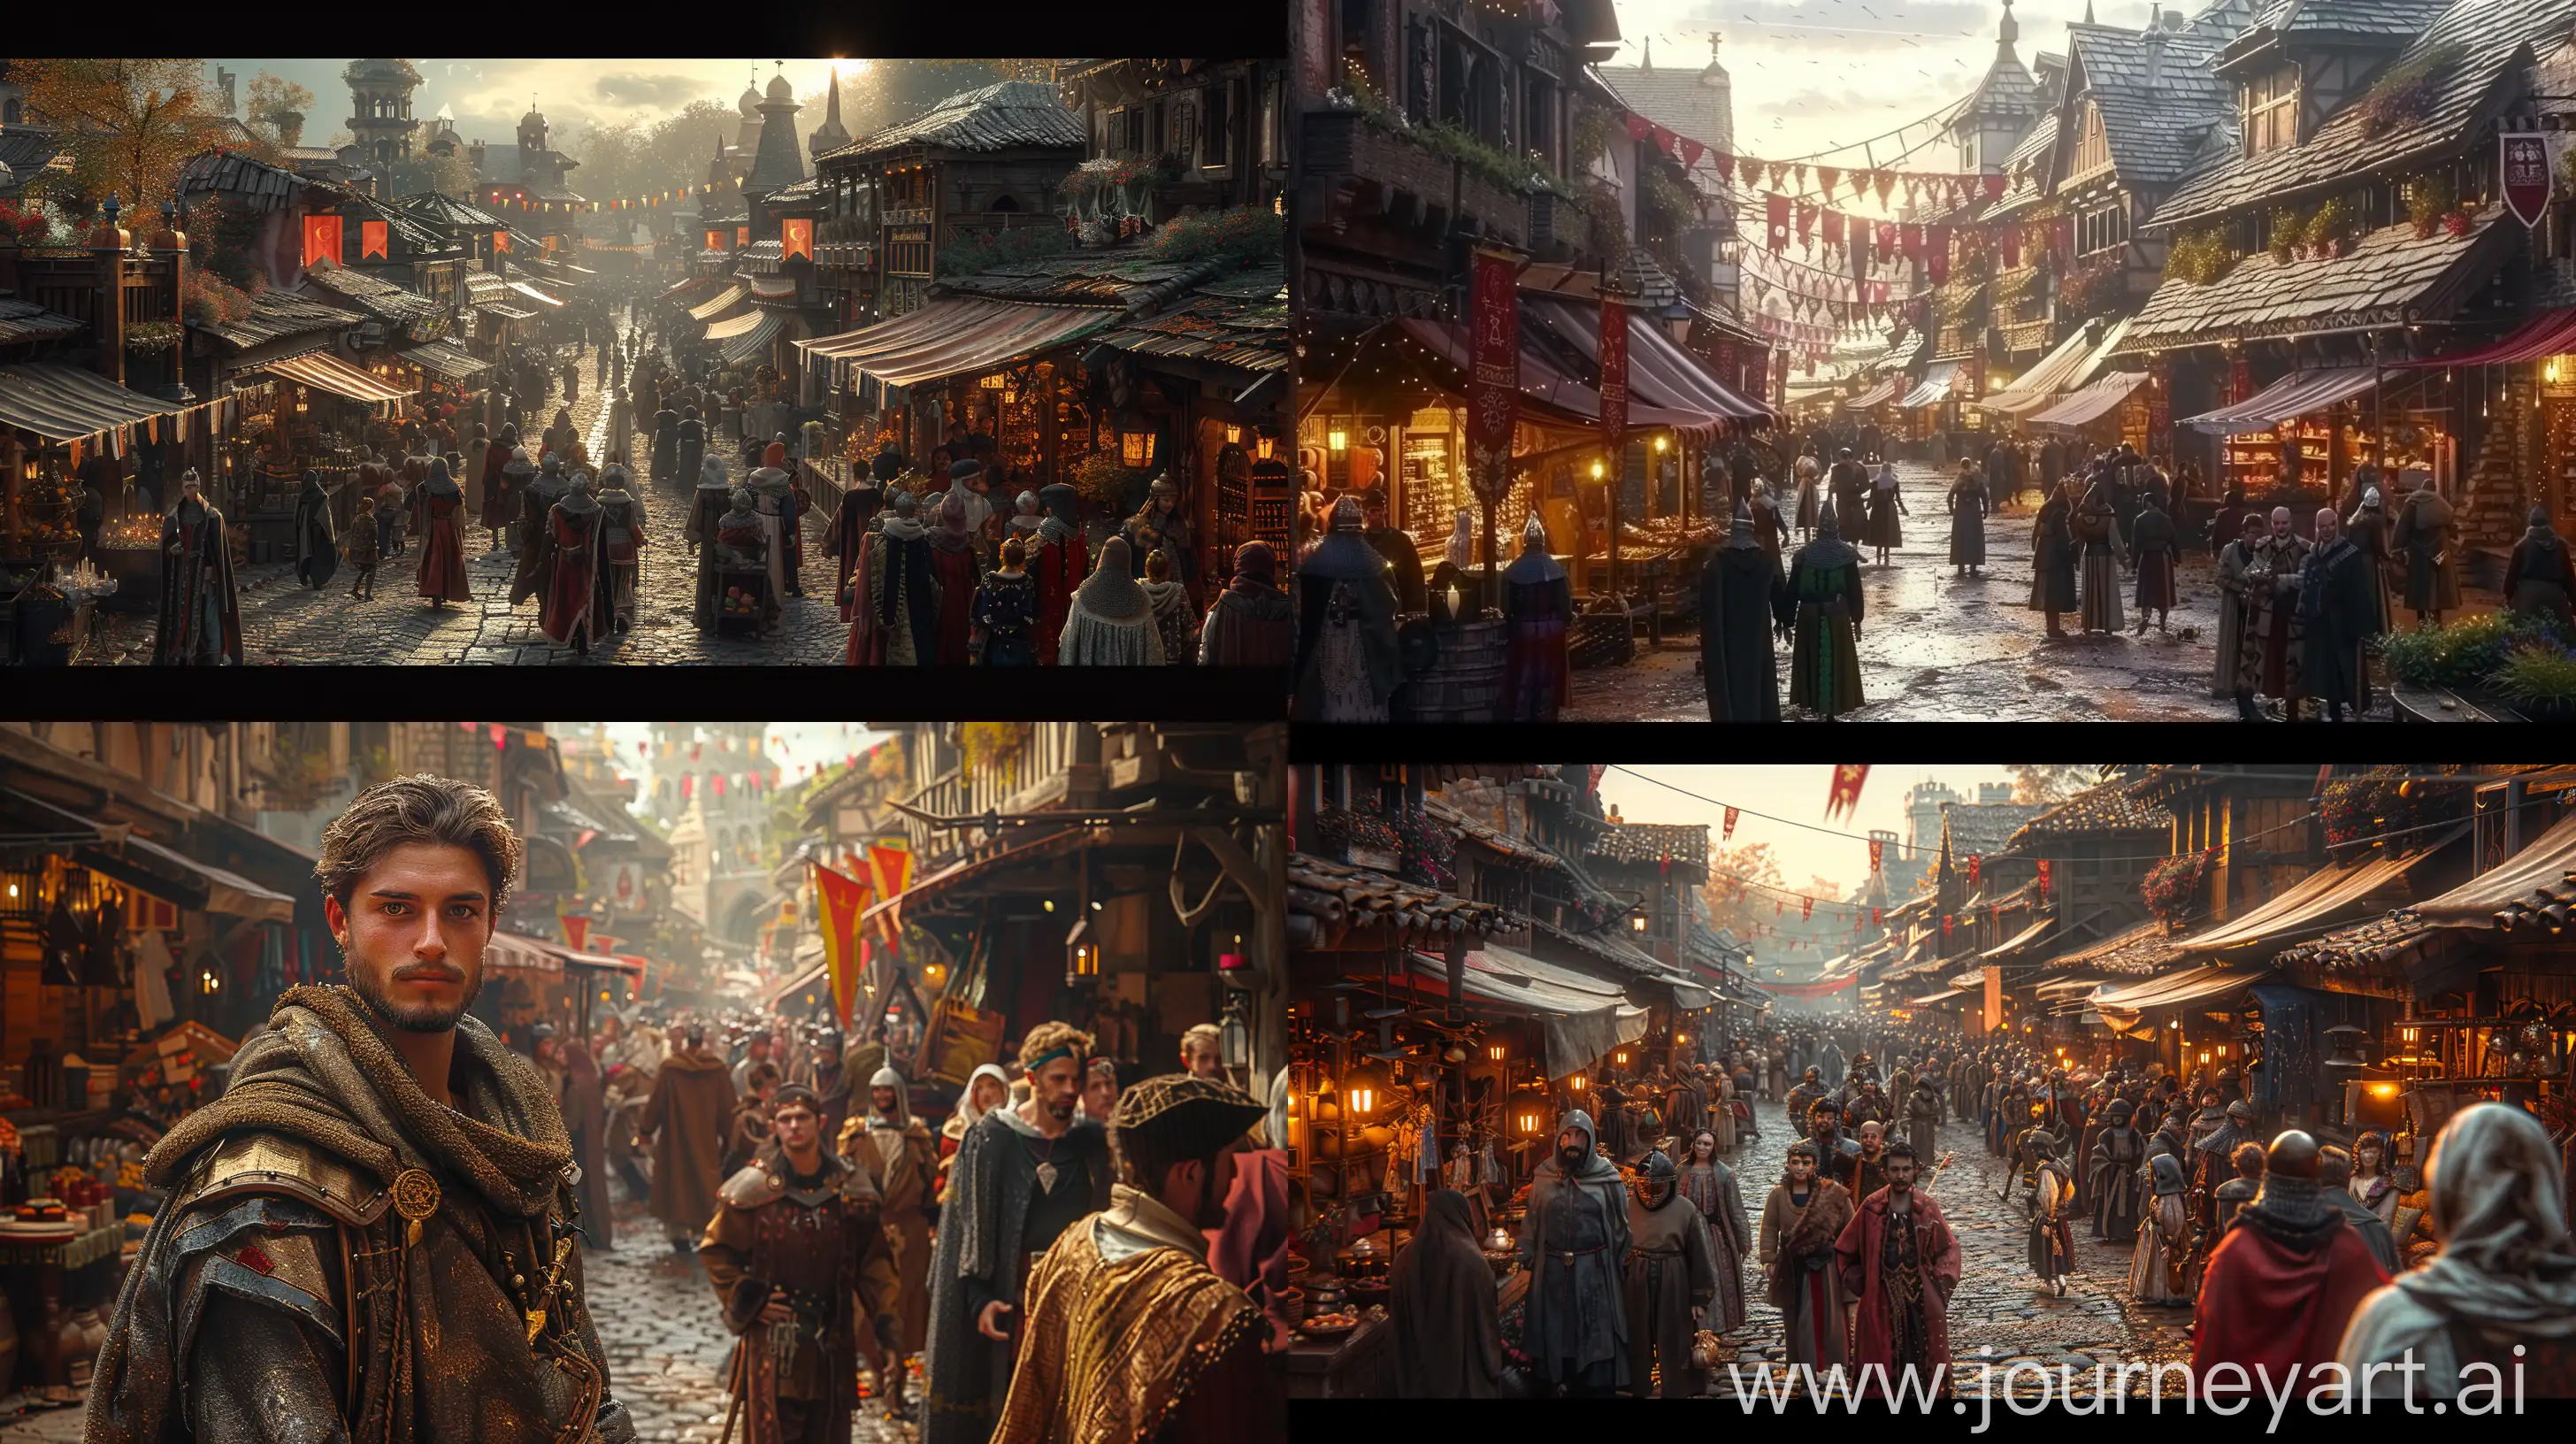 Charming-Medieval-City-Shopping-Street-with-Festive-Atmosphere-at-Sunset